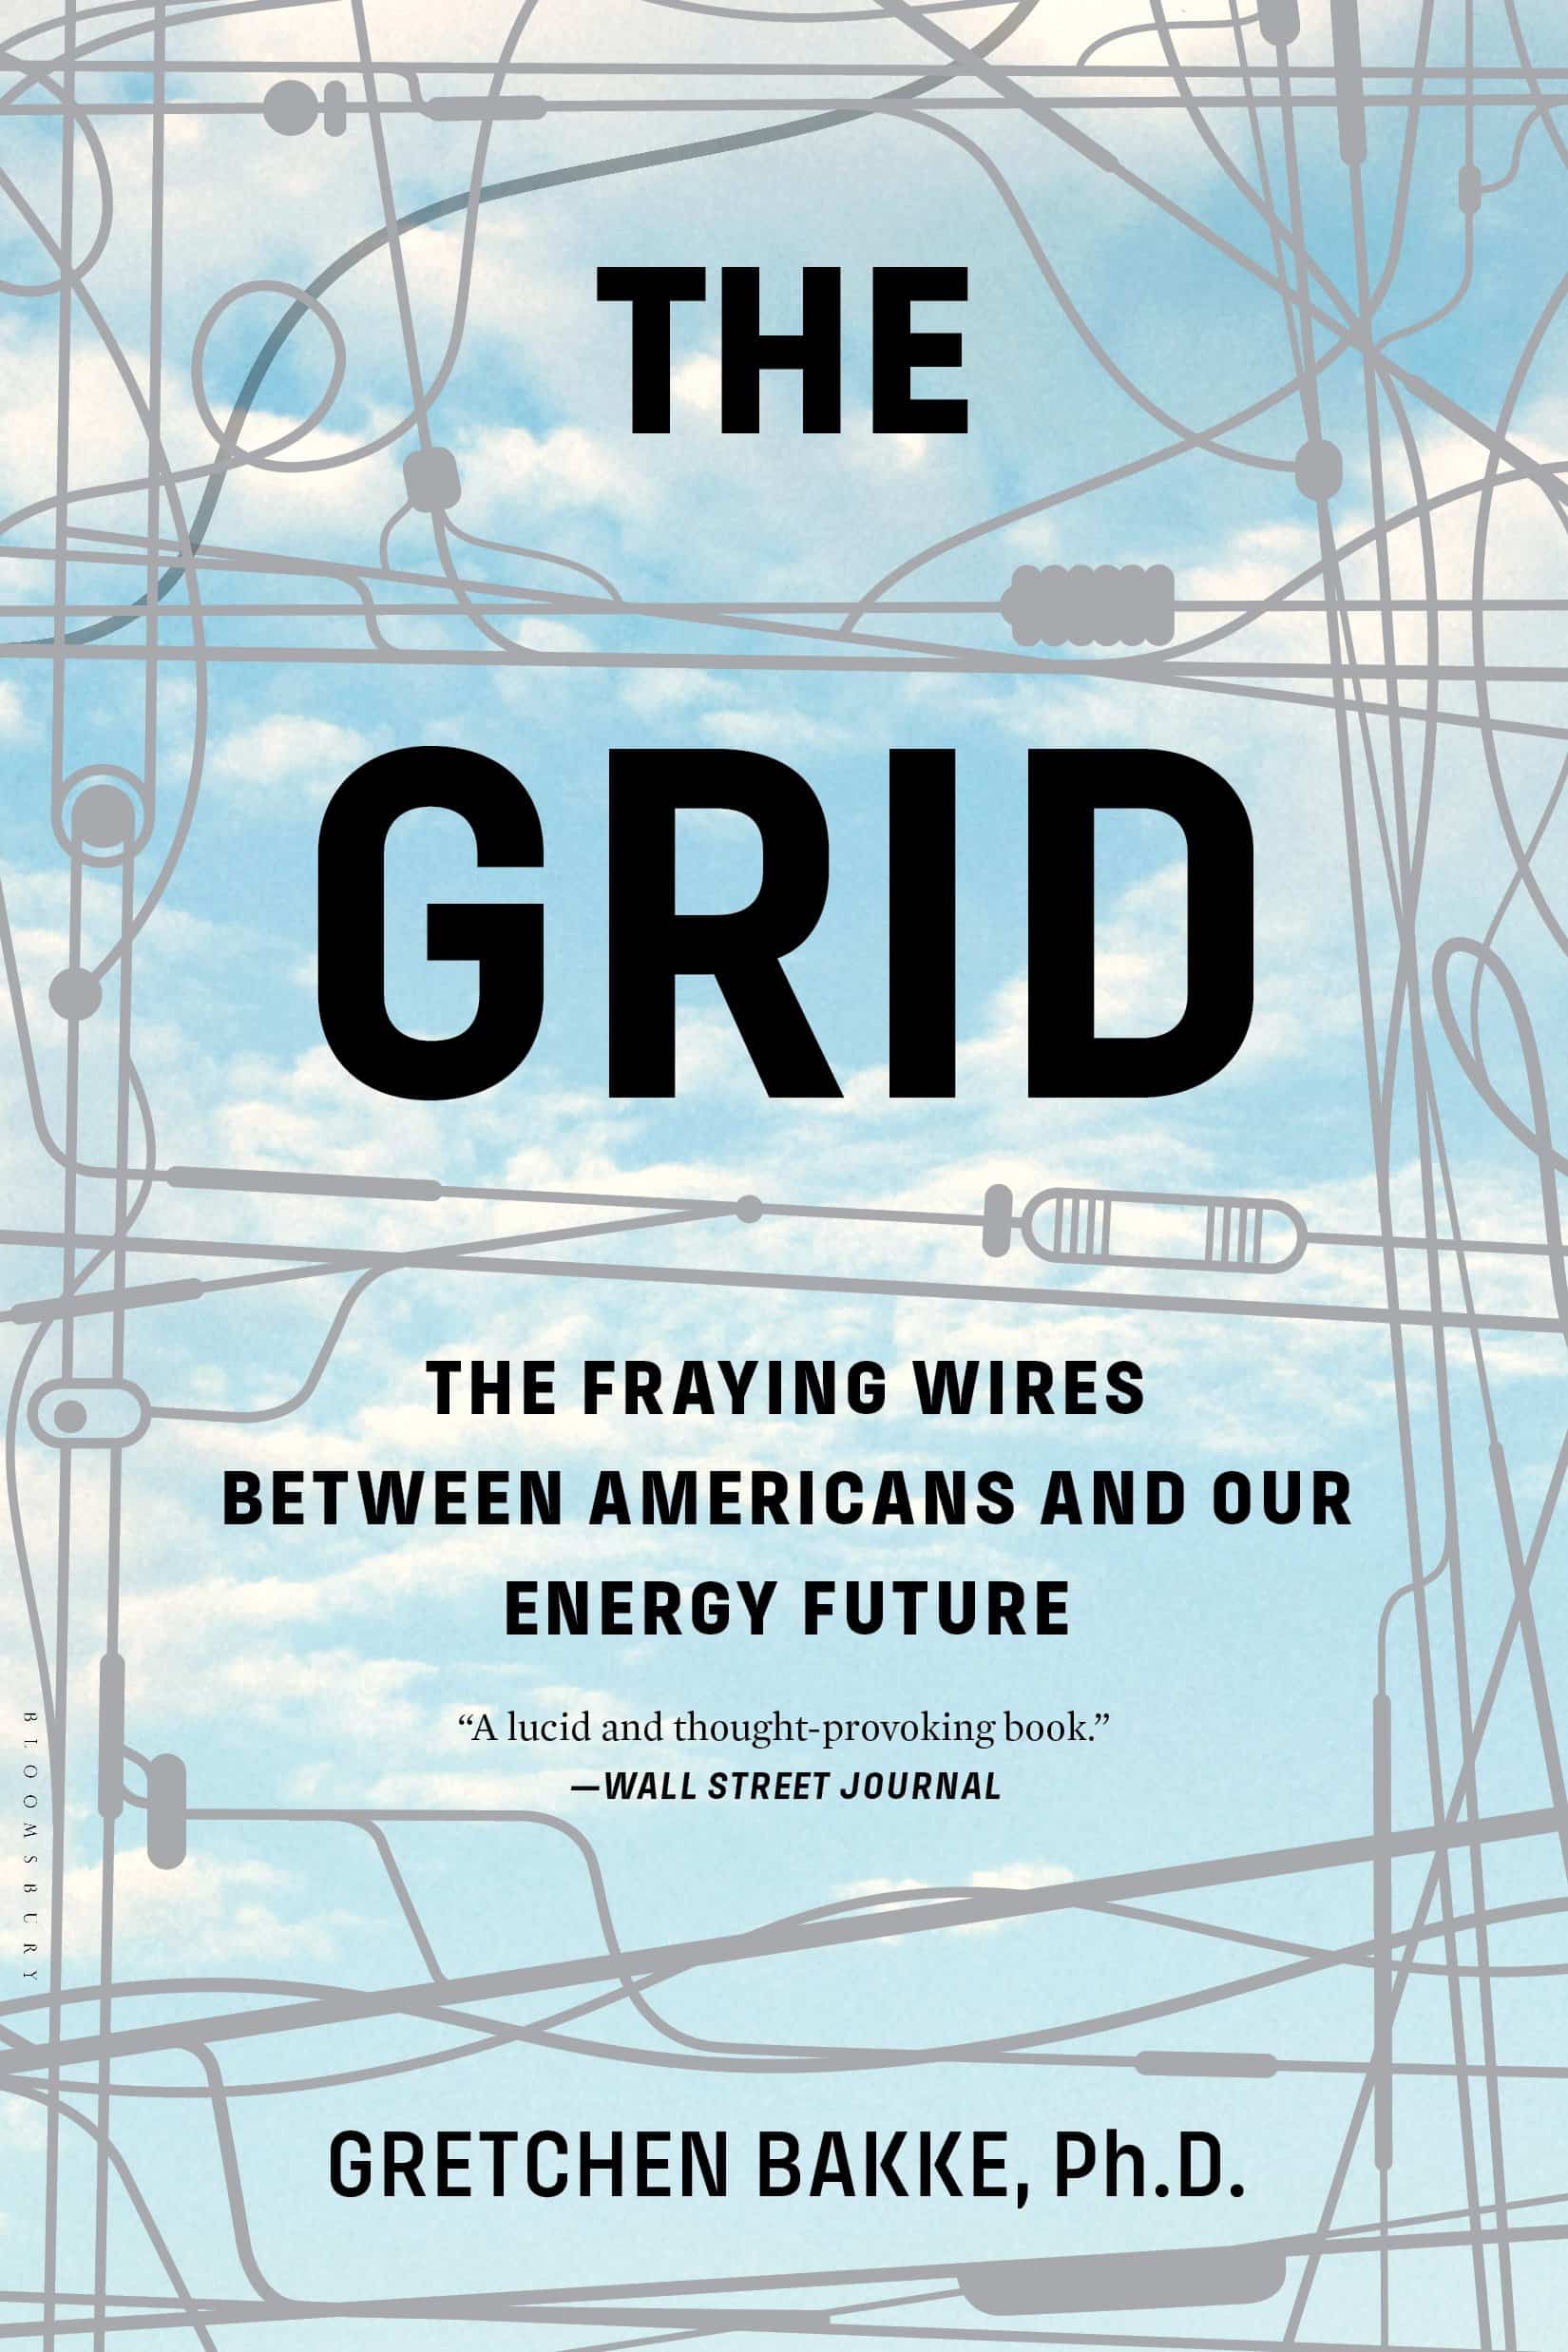 The cover of The Grid